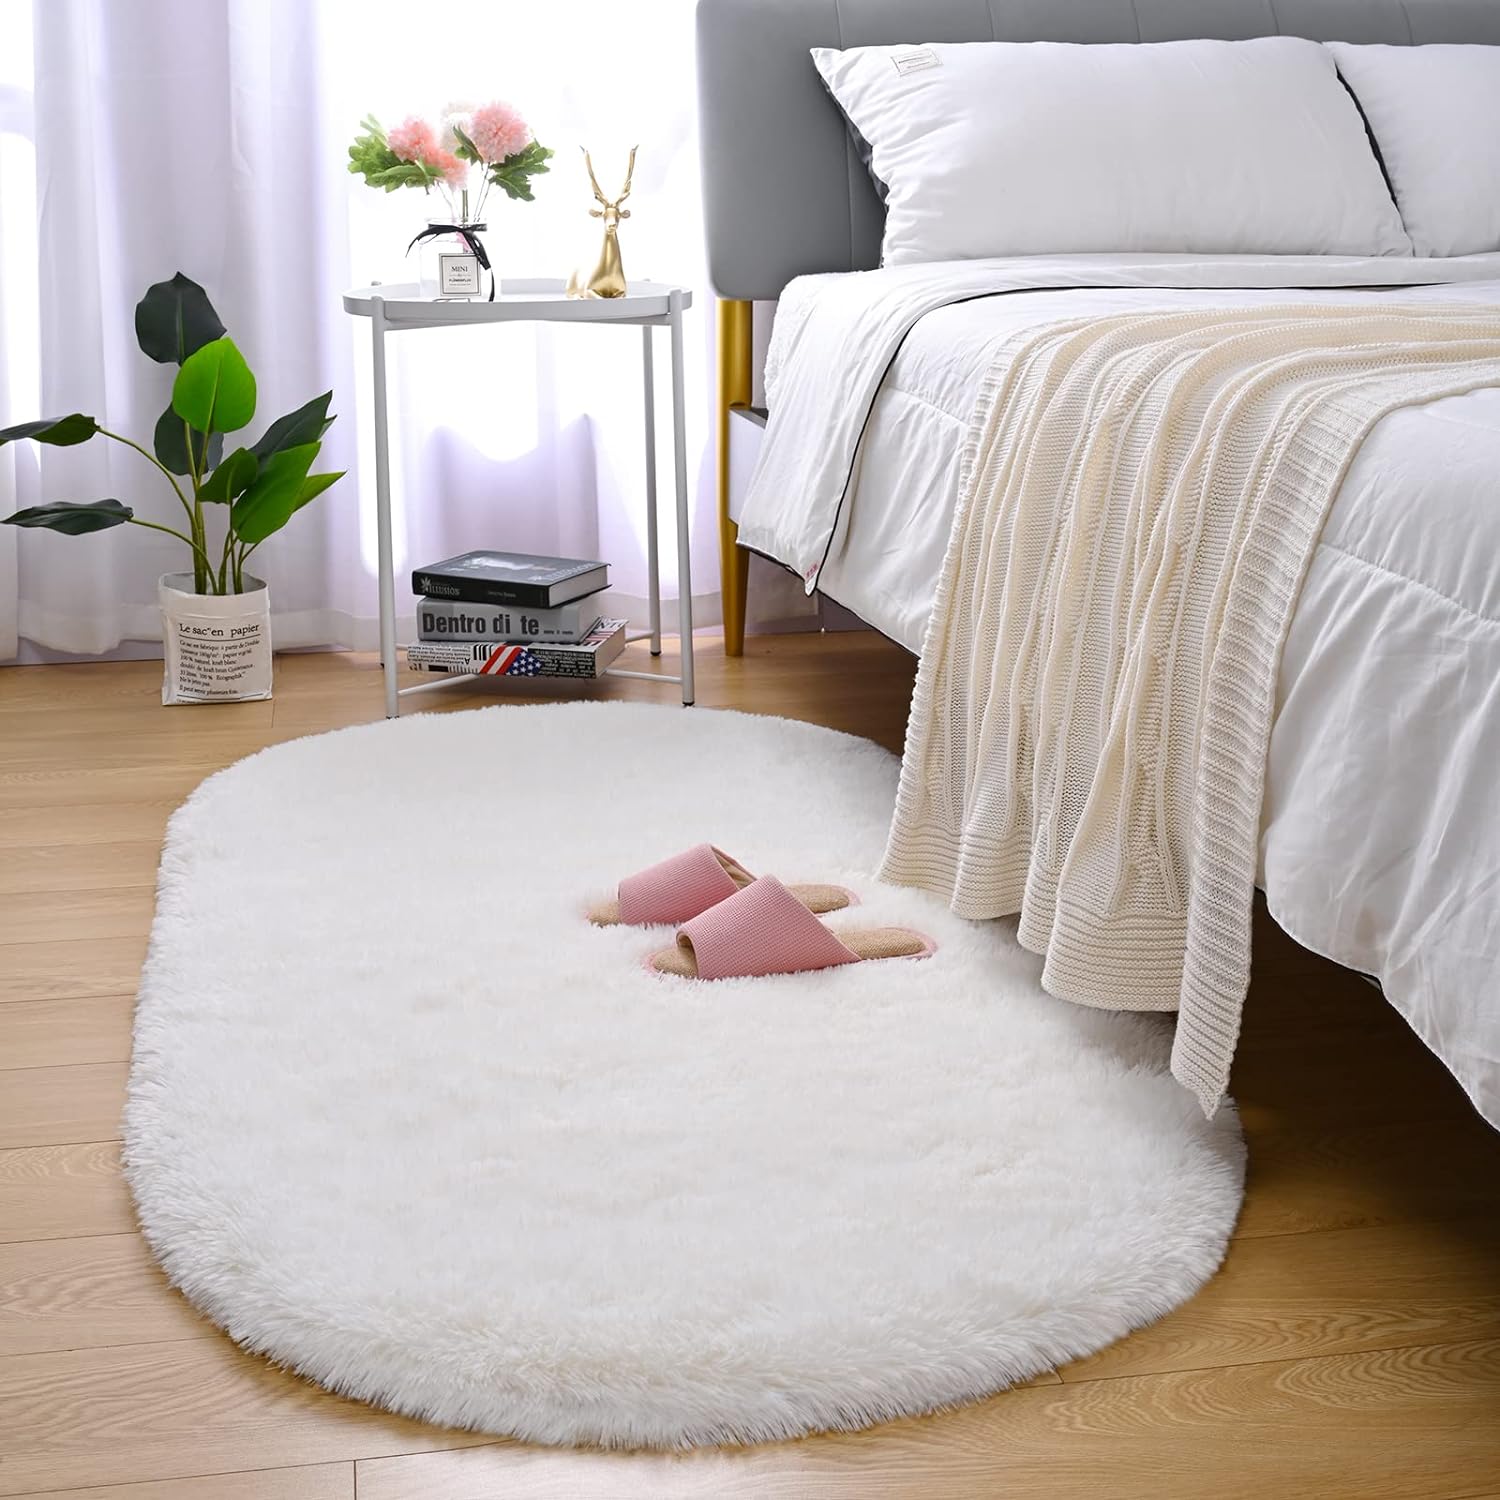 Merelax Soft Shaggy Rug for Kids Bedroom, Oval 2.6'x5.3' Cream Plush Fluffy Carpets for Living Room, Furry Carpet for Teen Girls Room, Anti-Skid Fuzzy Comfy Rug for Nursery Decor Cute Baby Play Mat